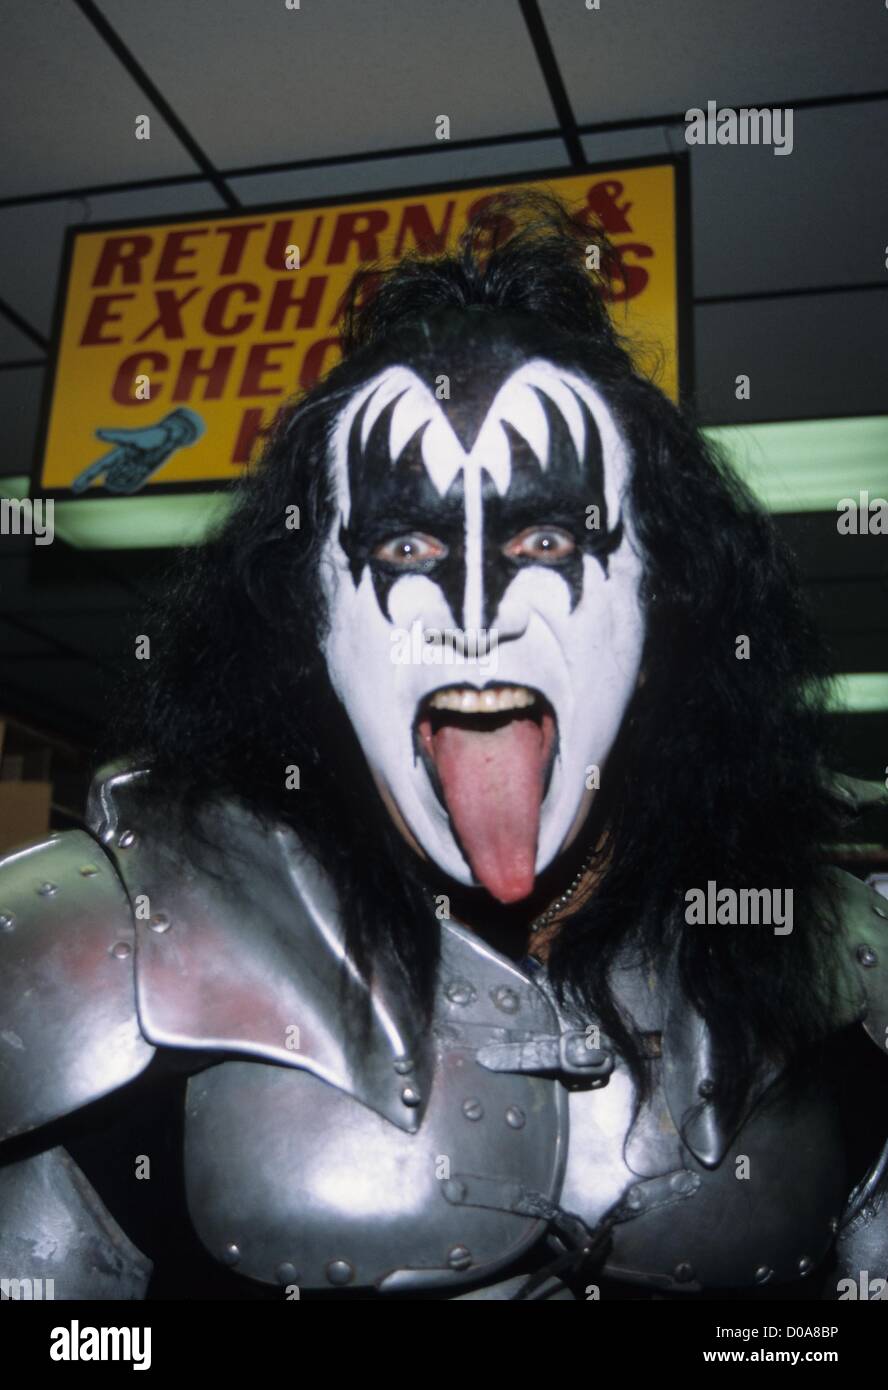 GENE SIMMONS.Kiss in store appearance at Tower Records in West Hollywood, Ca. 2001.k23304ag.KISS.(Credit Image: © Amy Graves/Globe Photos/ZUMAPRESS.com) Stock Photo